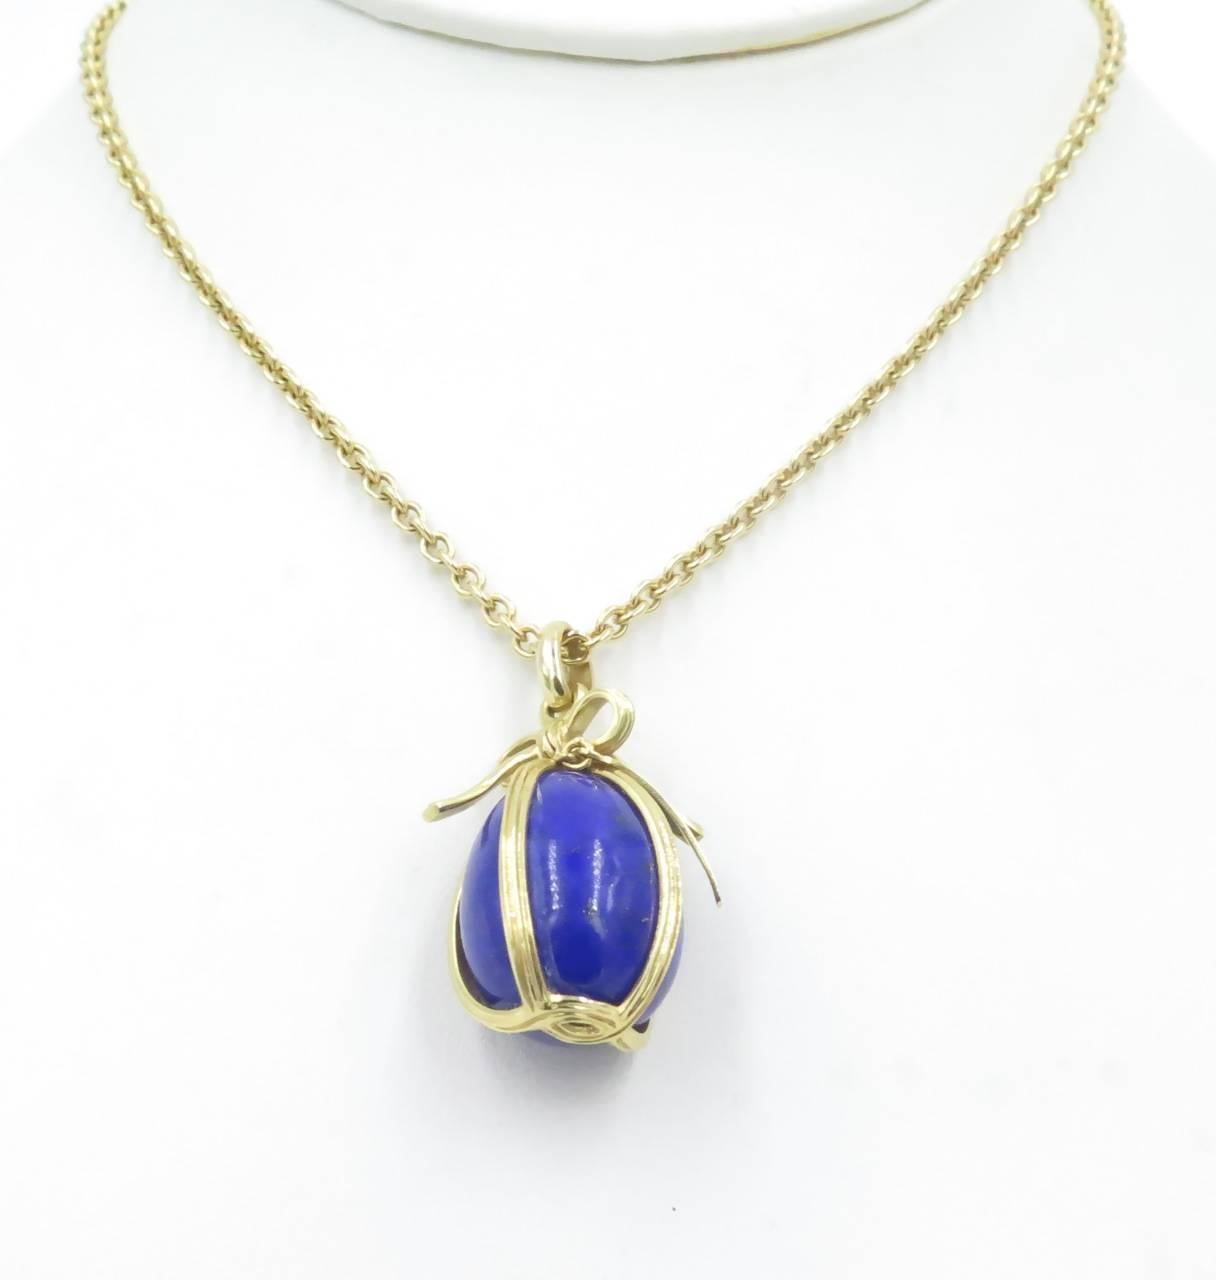 An 18 karat yellow gold lapis lazuli egg pendant necklace.  Tiffany & Co., Schlumberger.  The model is known as the large egg pendant.  Designed as a lapis lazuli egg, wrapped in a gold ribbon, suspended from an oval link chain.  Chain length is